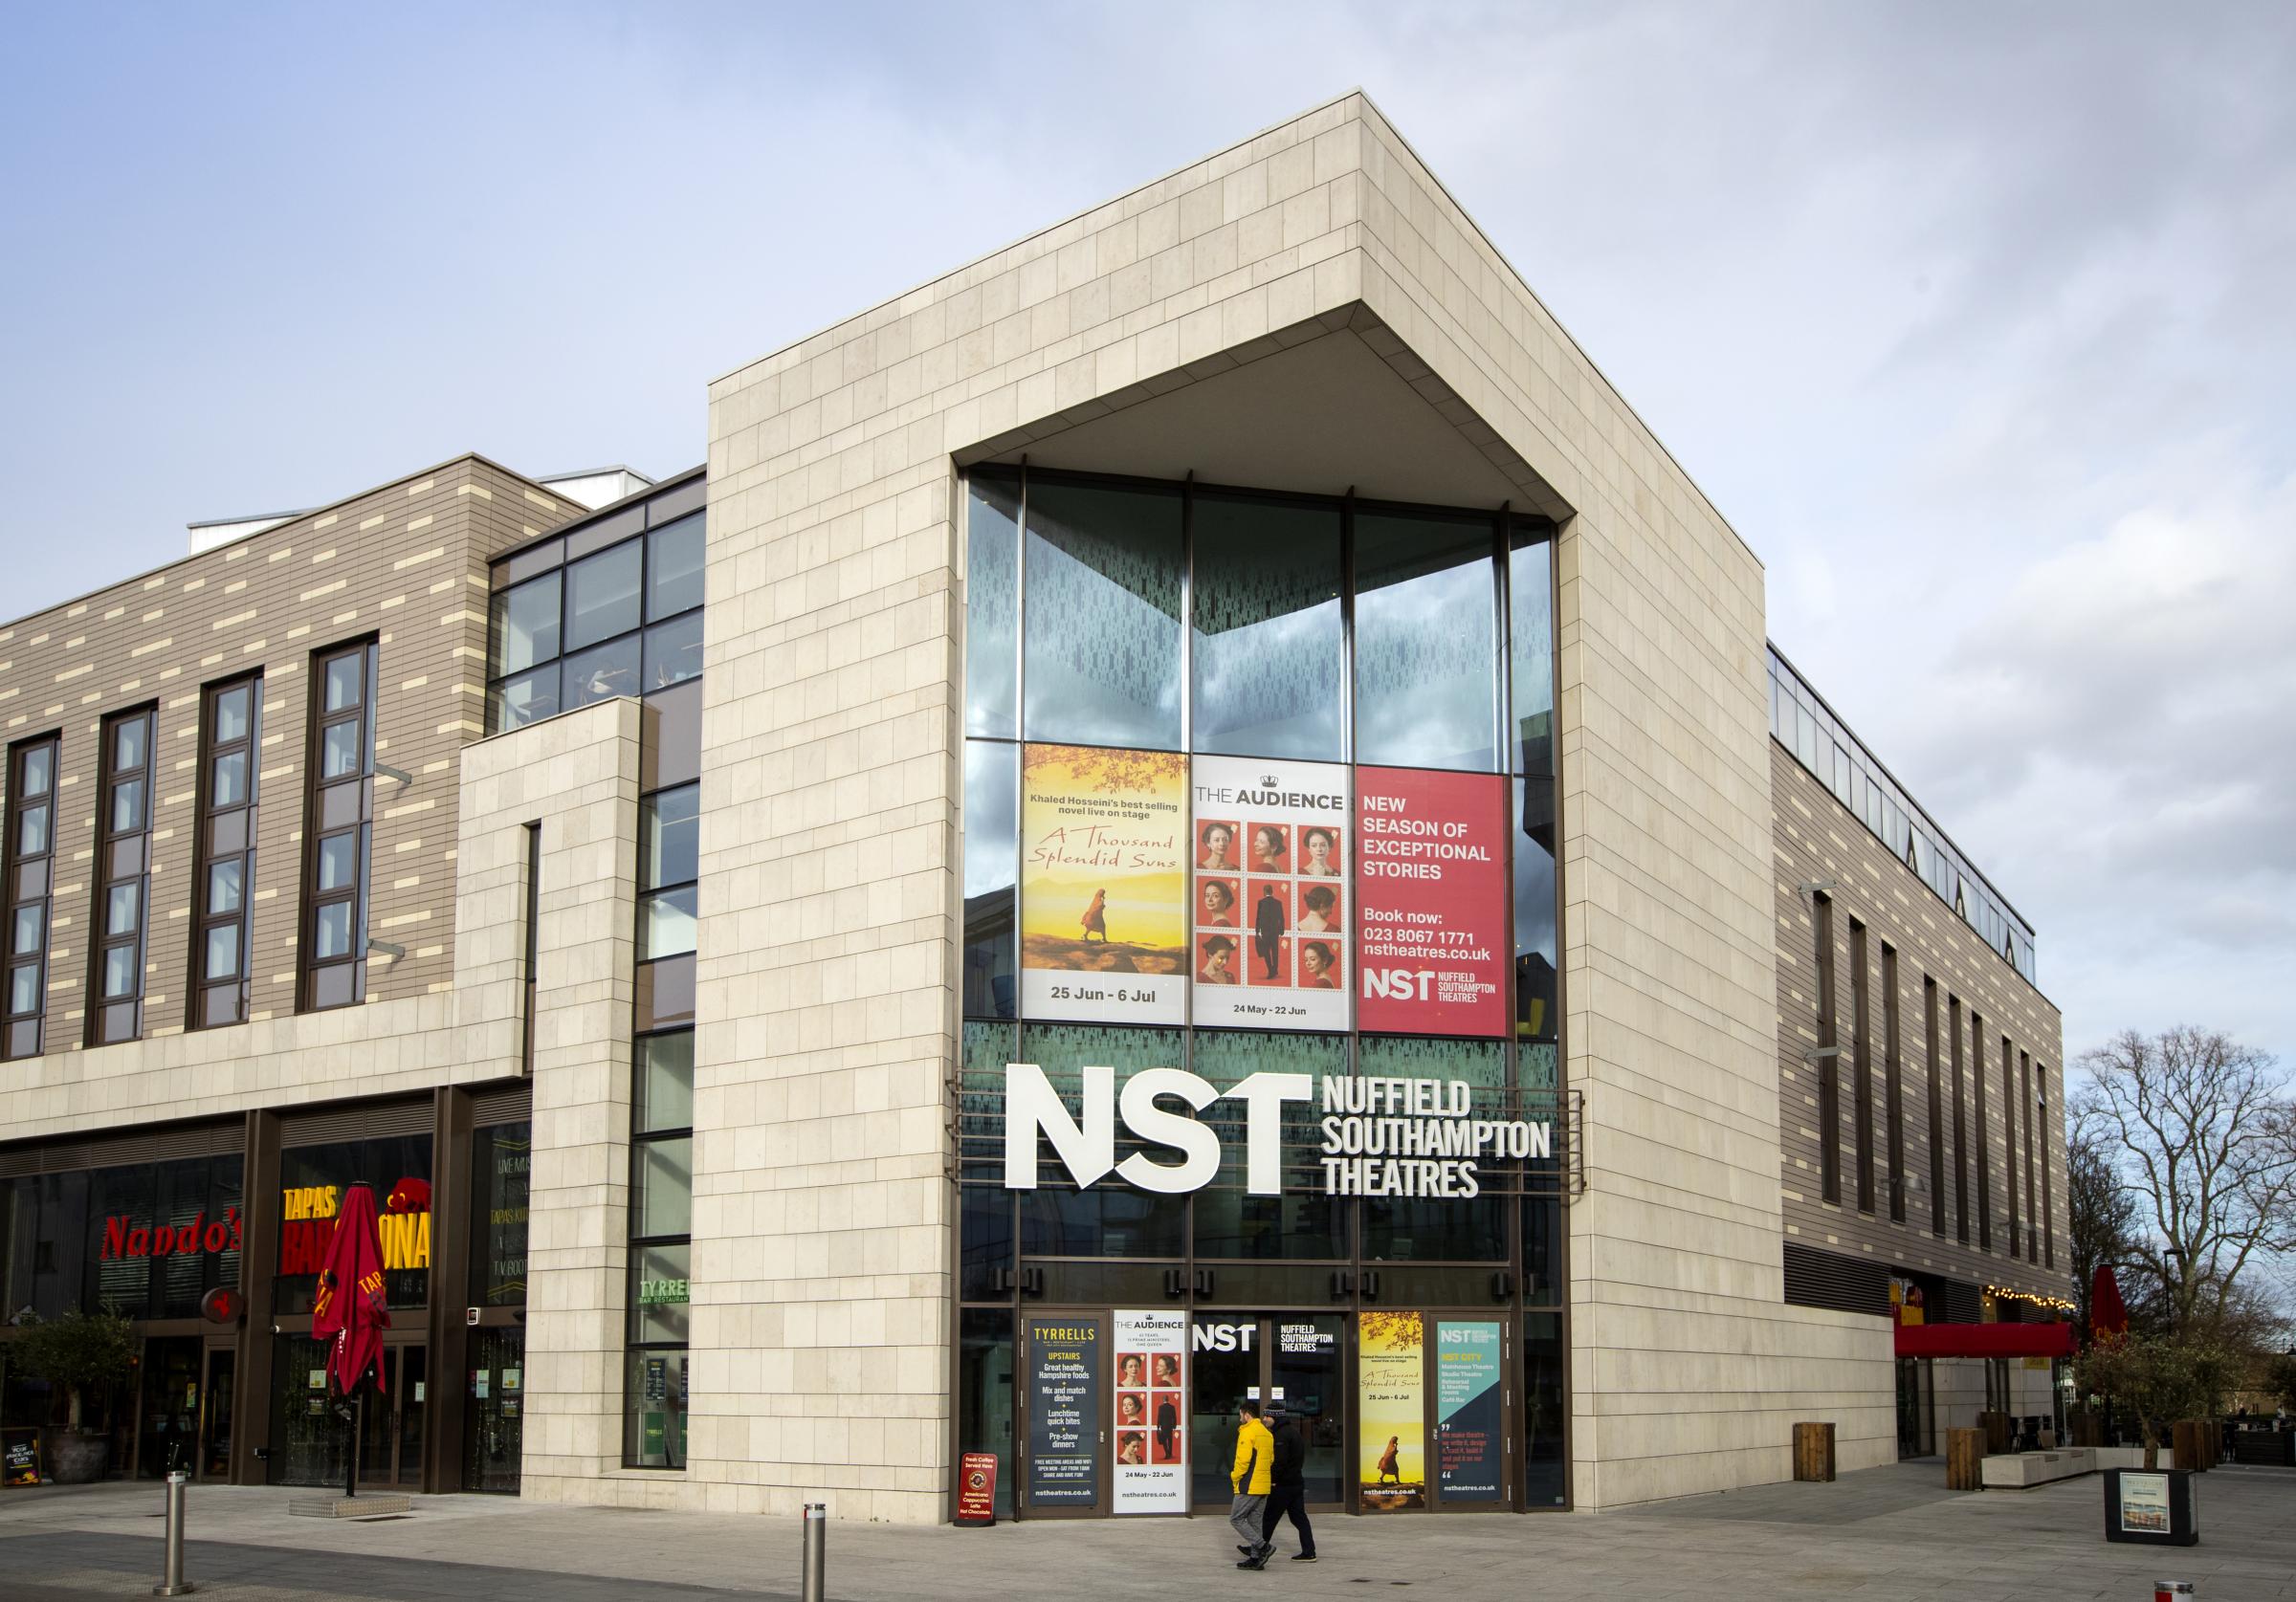 What can accountants learn about the collapse of Nuffield Southampton Theatres?